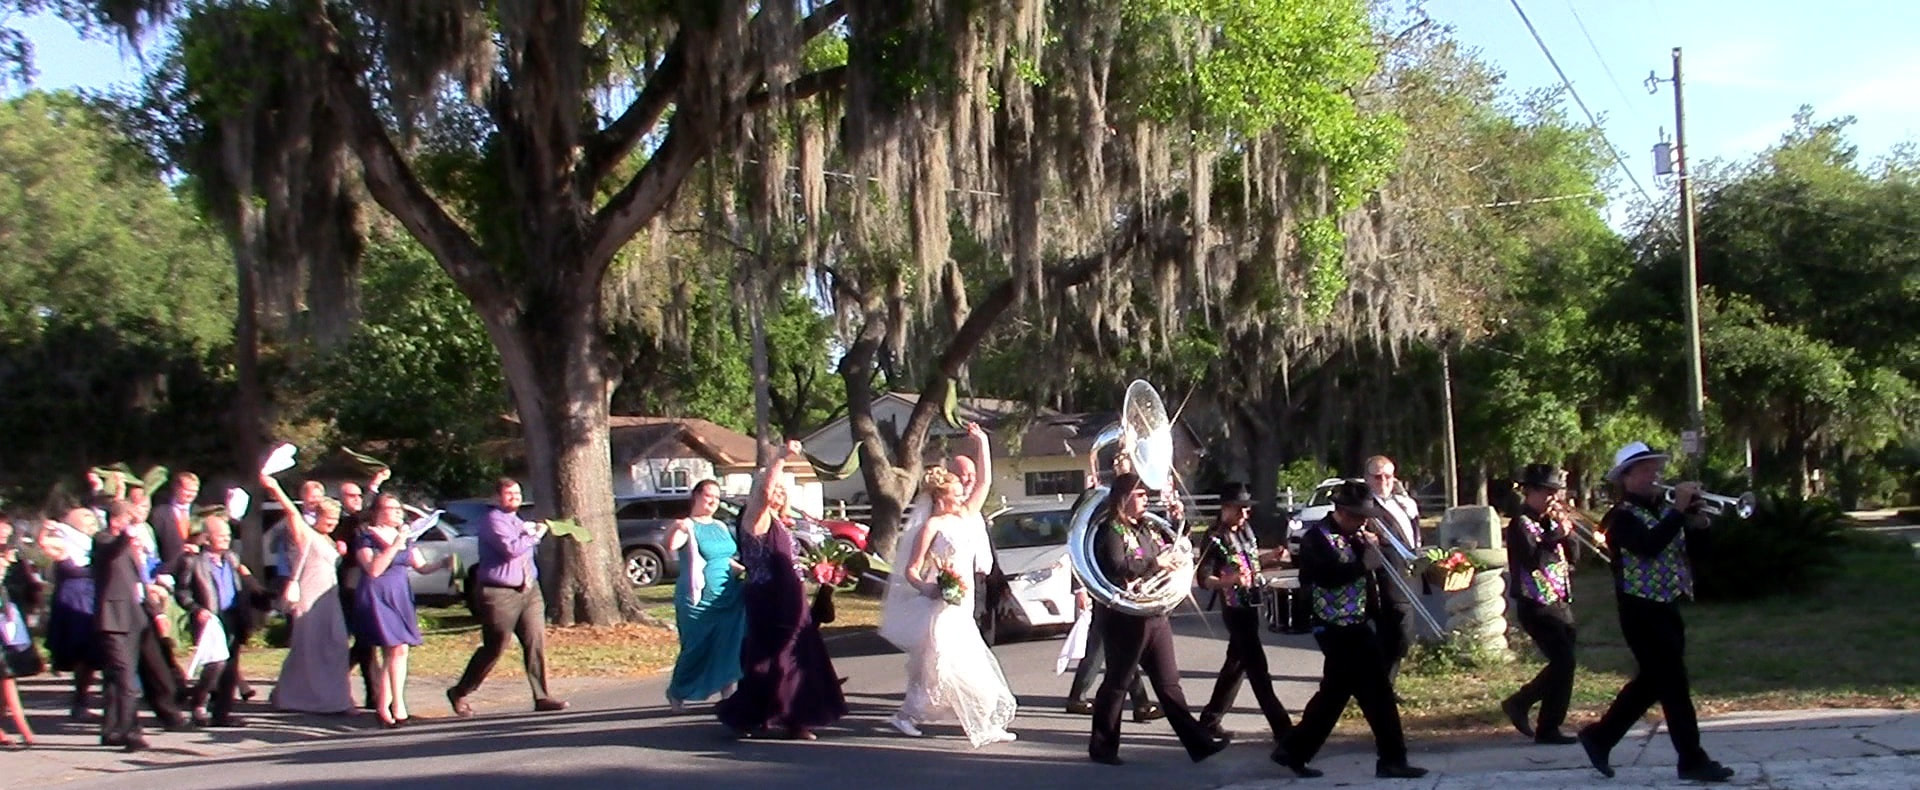 The Real Deal Brass Band performing for a second line wedding parade available in Sarasota, Florida. 